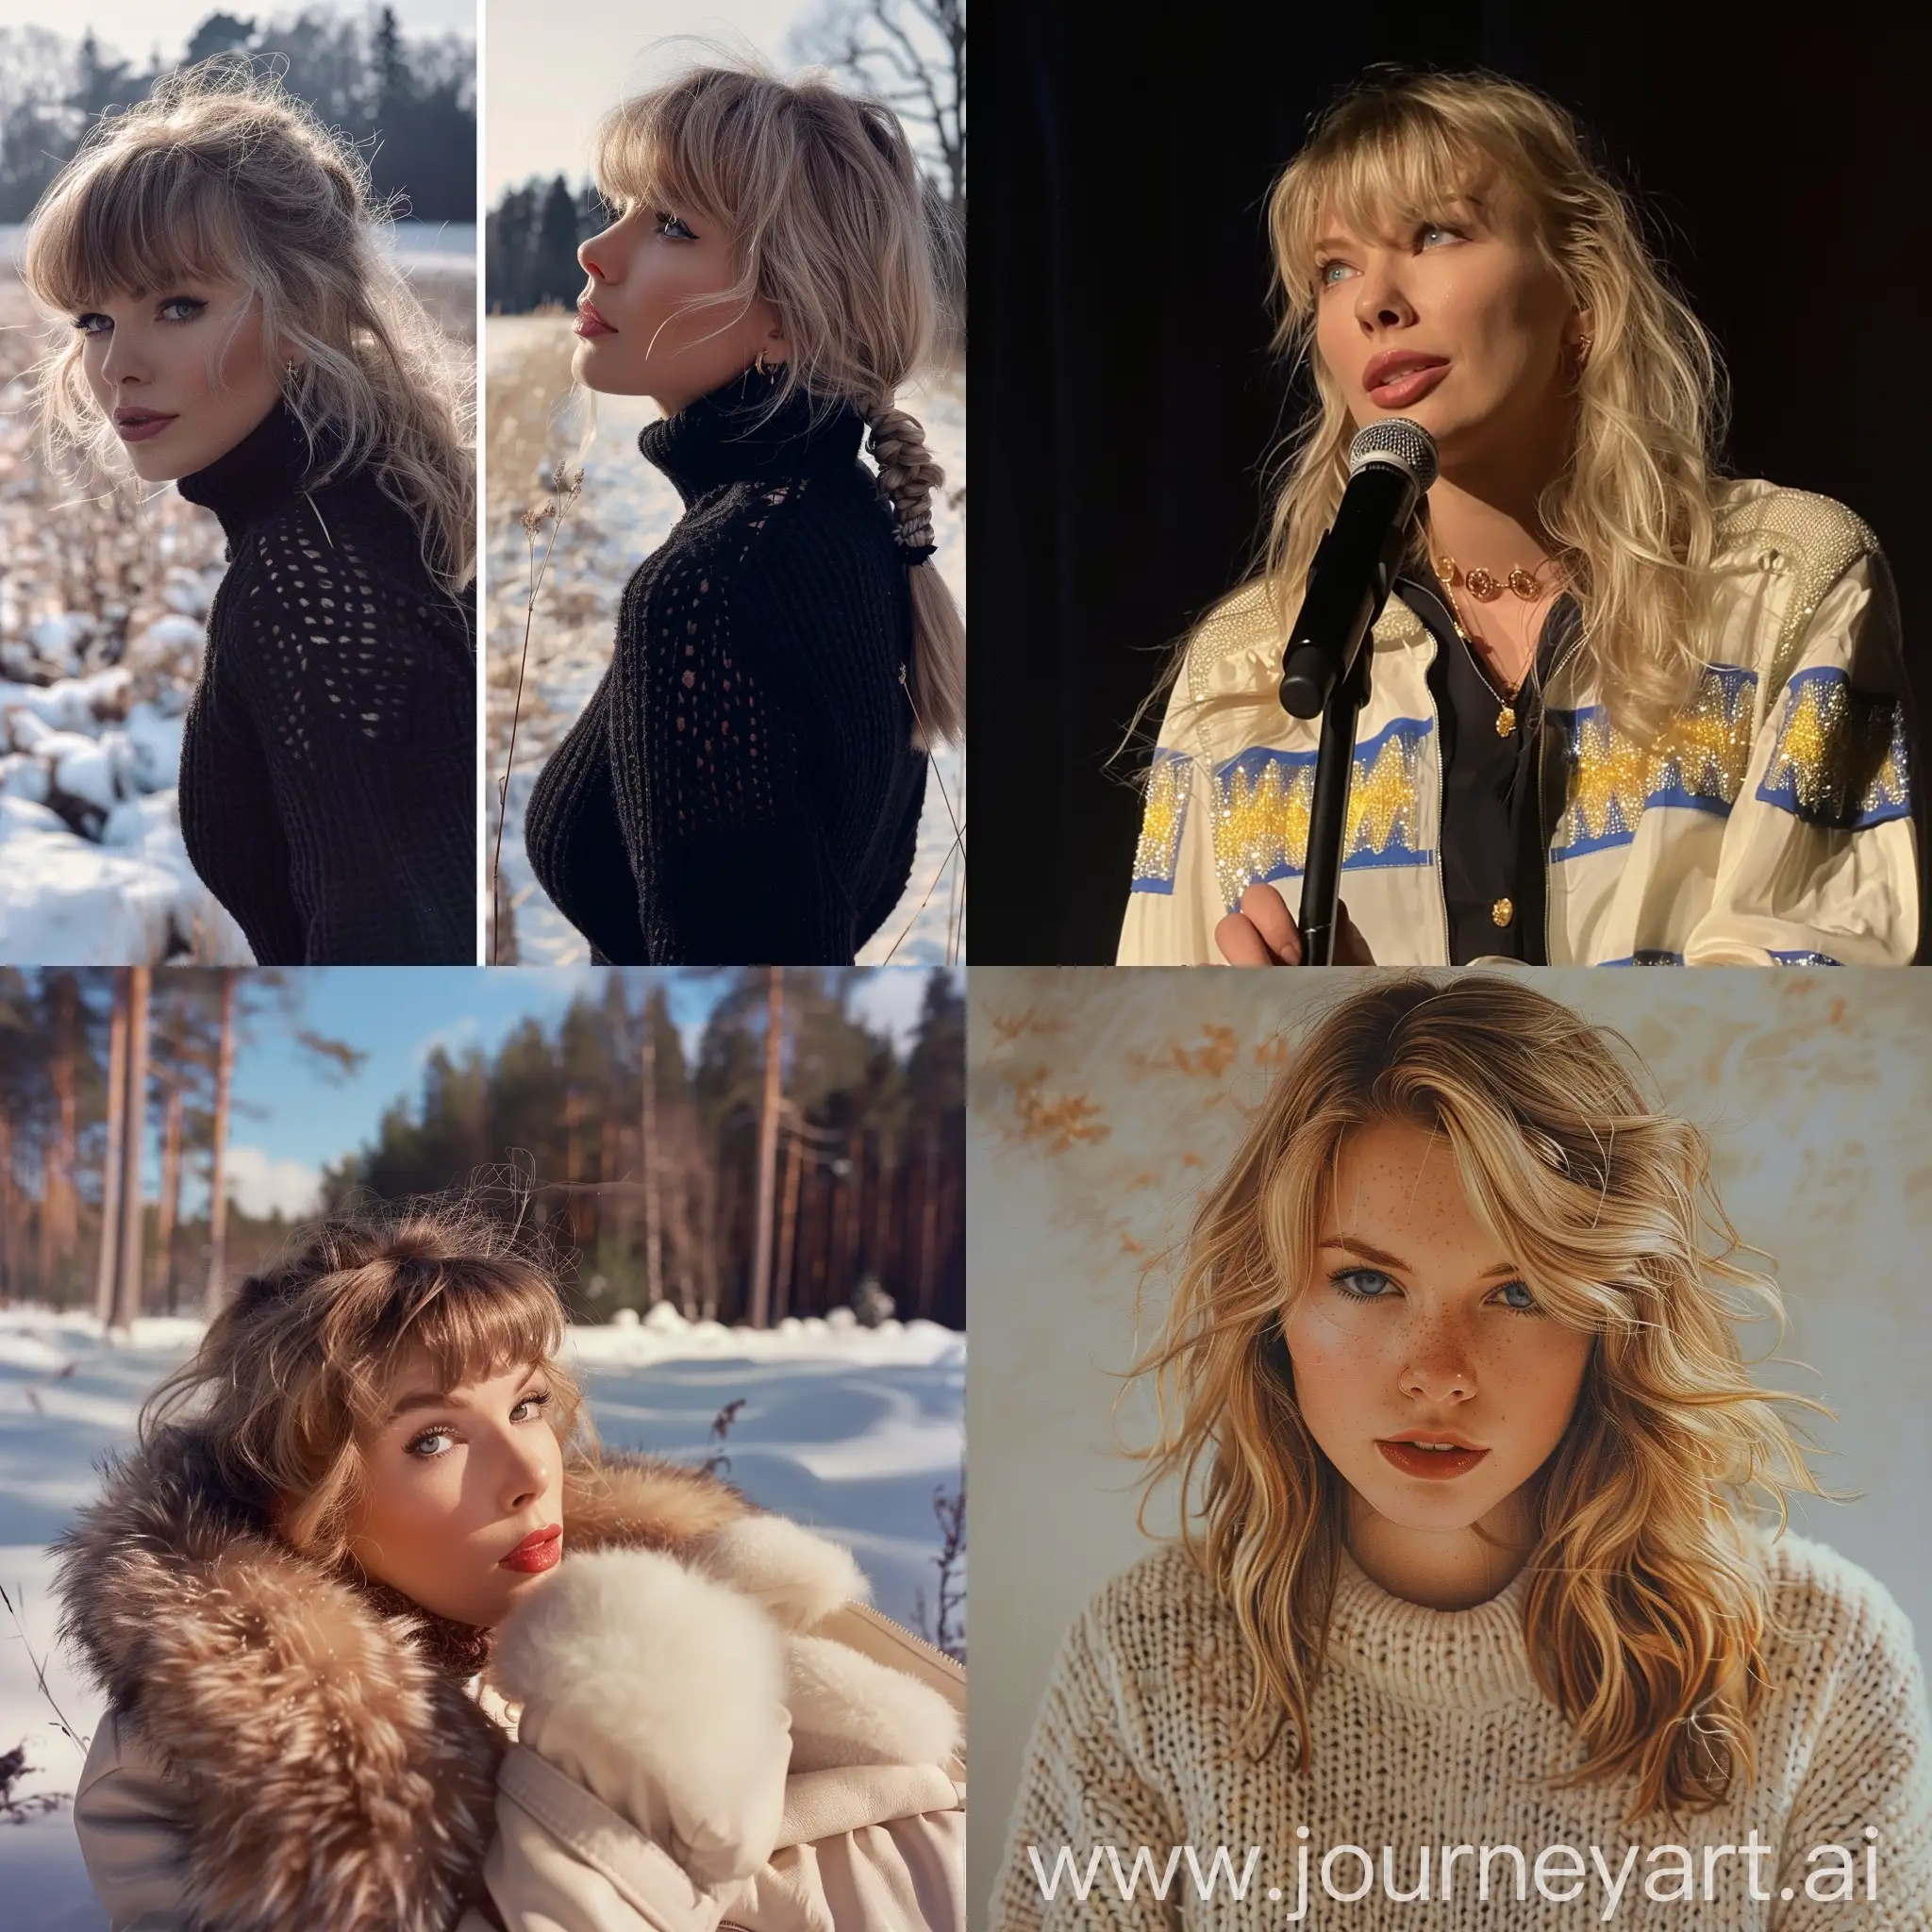 Taylor-Swift-Concert-in-Sweden-Captivating-11-Aspect-Ratio-Visual-Experience